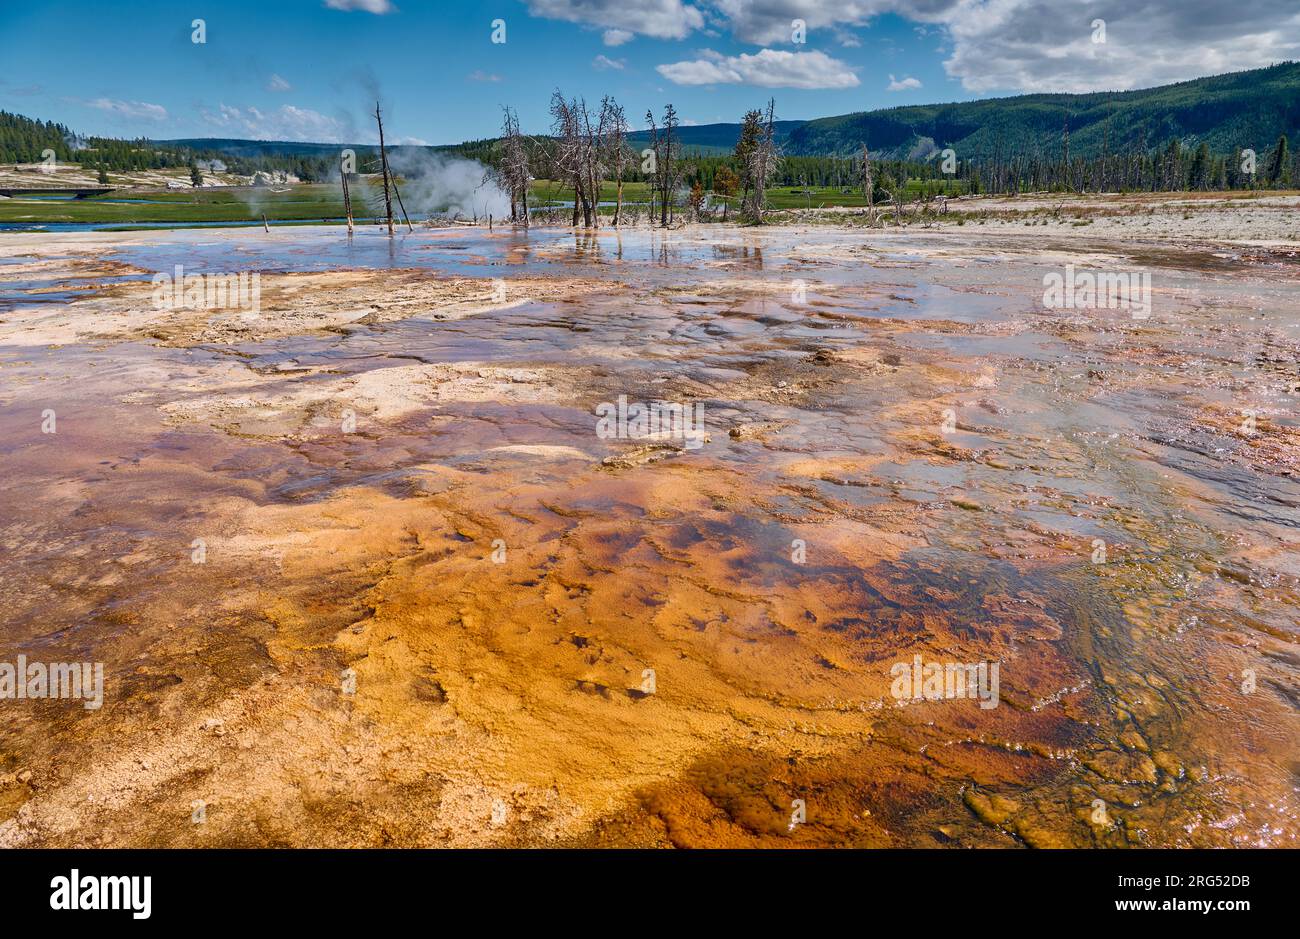 orange bacteria in Biscuit Basin, Yellowstone National Park, Wyoming, United States of America Stock Photo